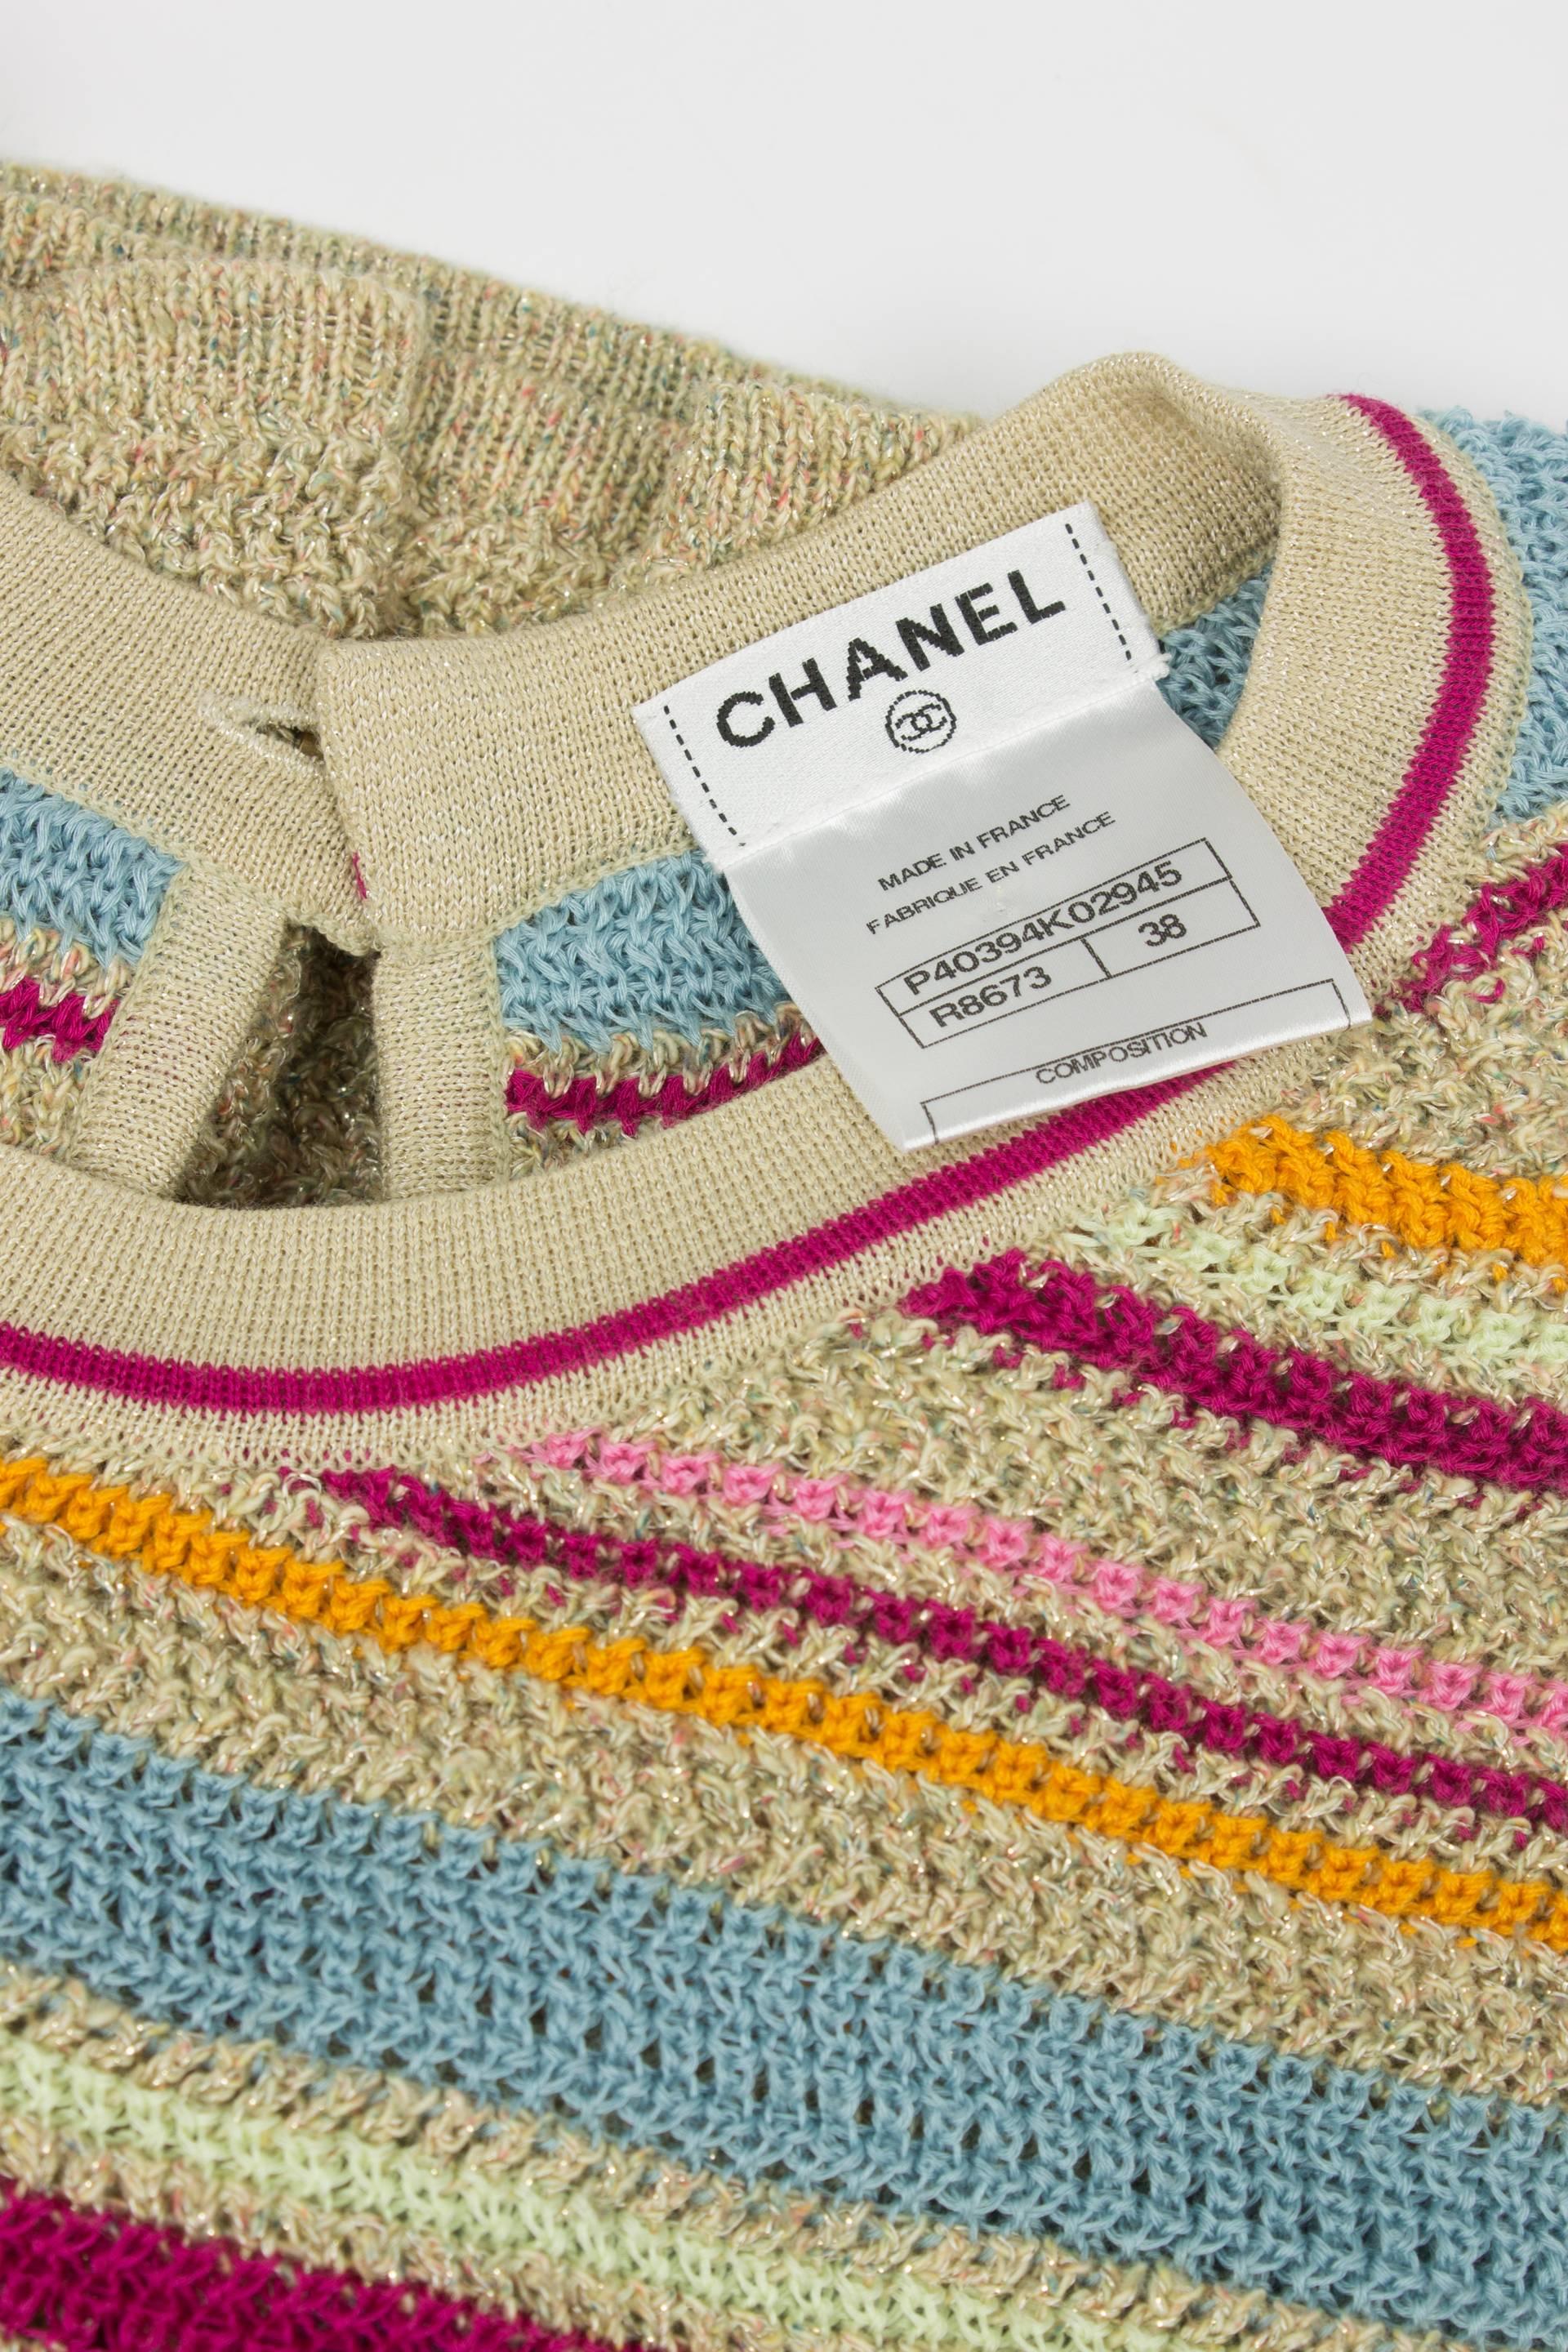 Women's Chanel Tan and Multi-Colored Cotton Knit Short Striped Dress Resort 2011 